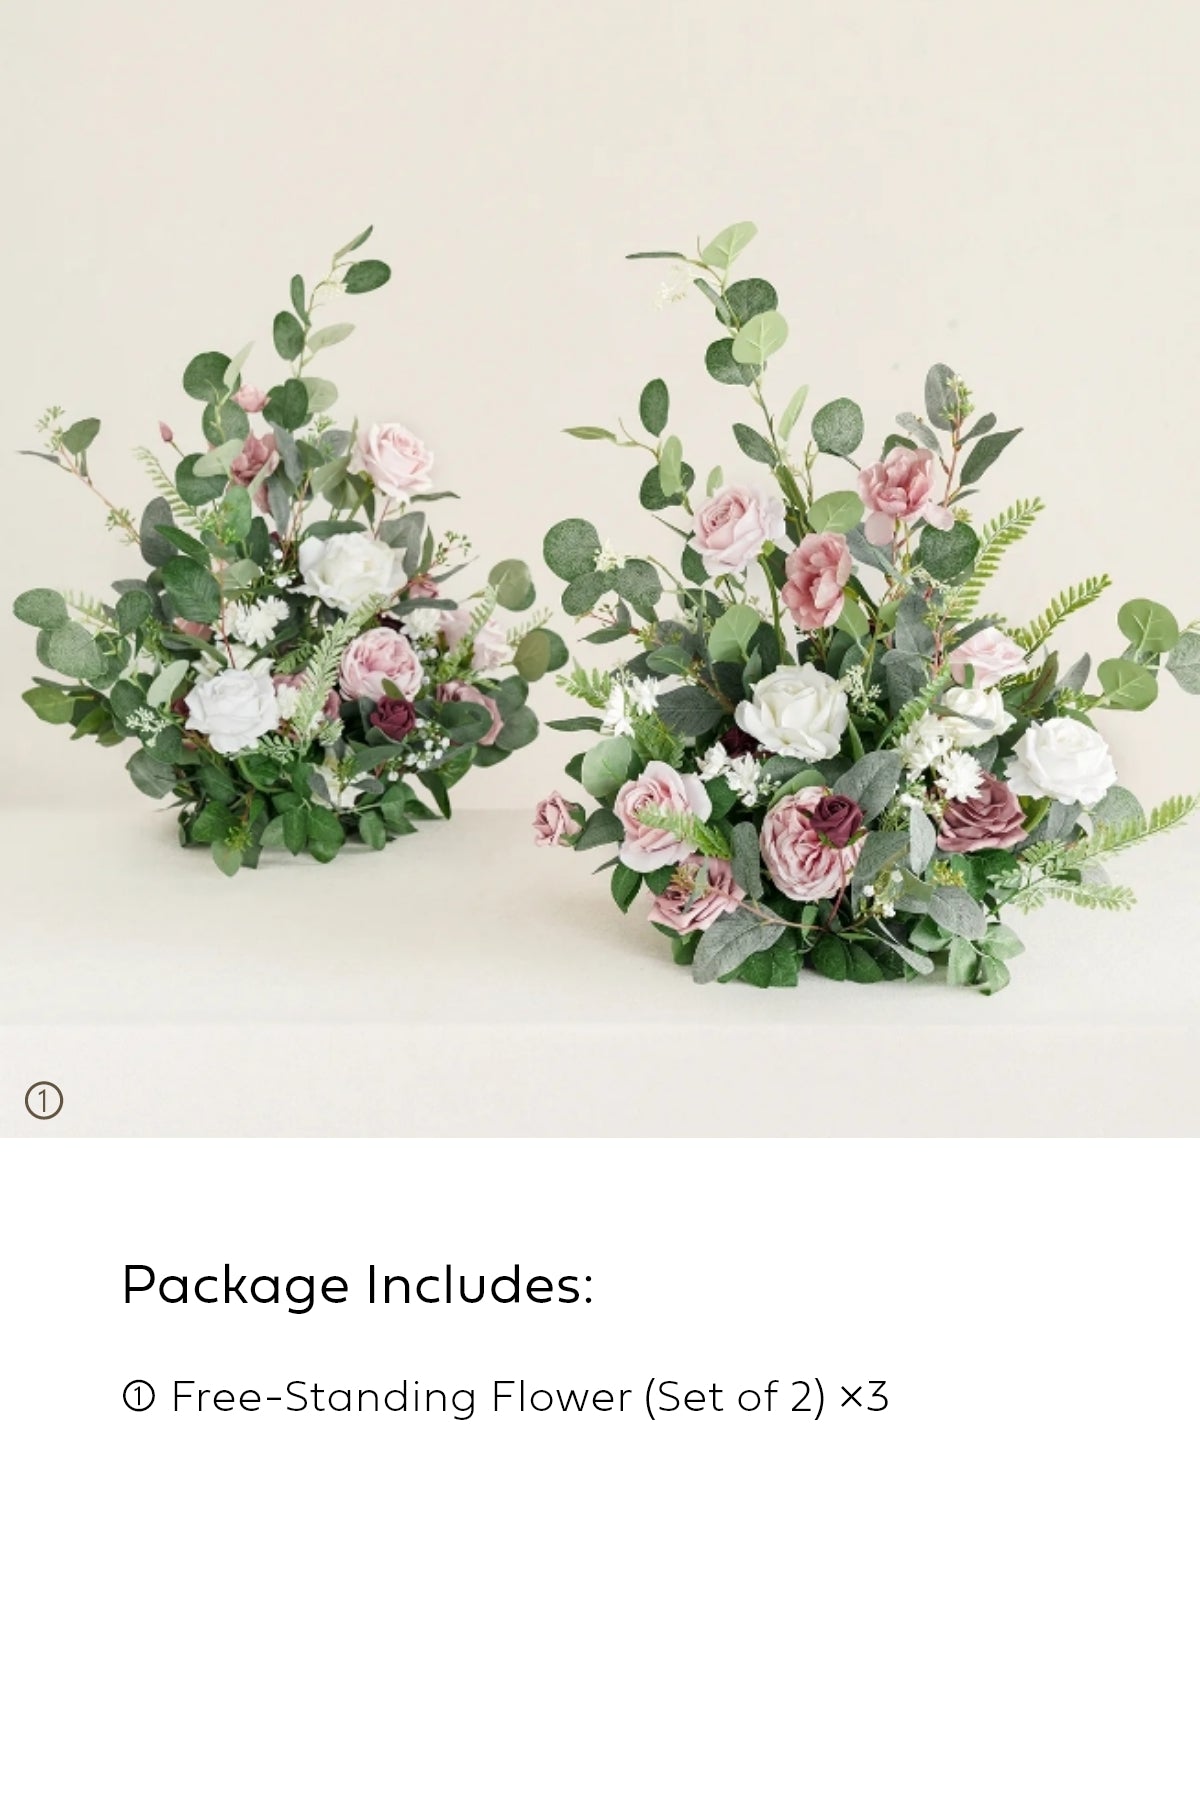 Free-Standing Flower Arrangements in Dusty Rose & Cream | Clearance